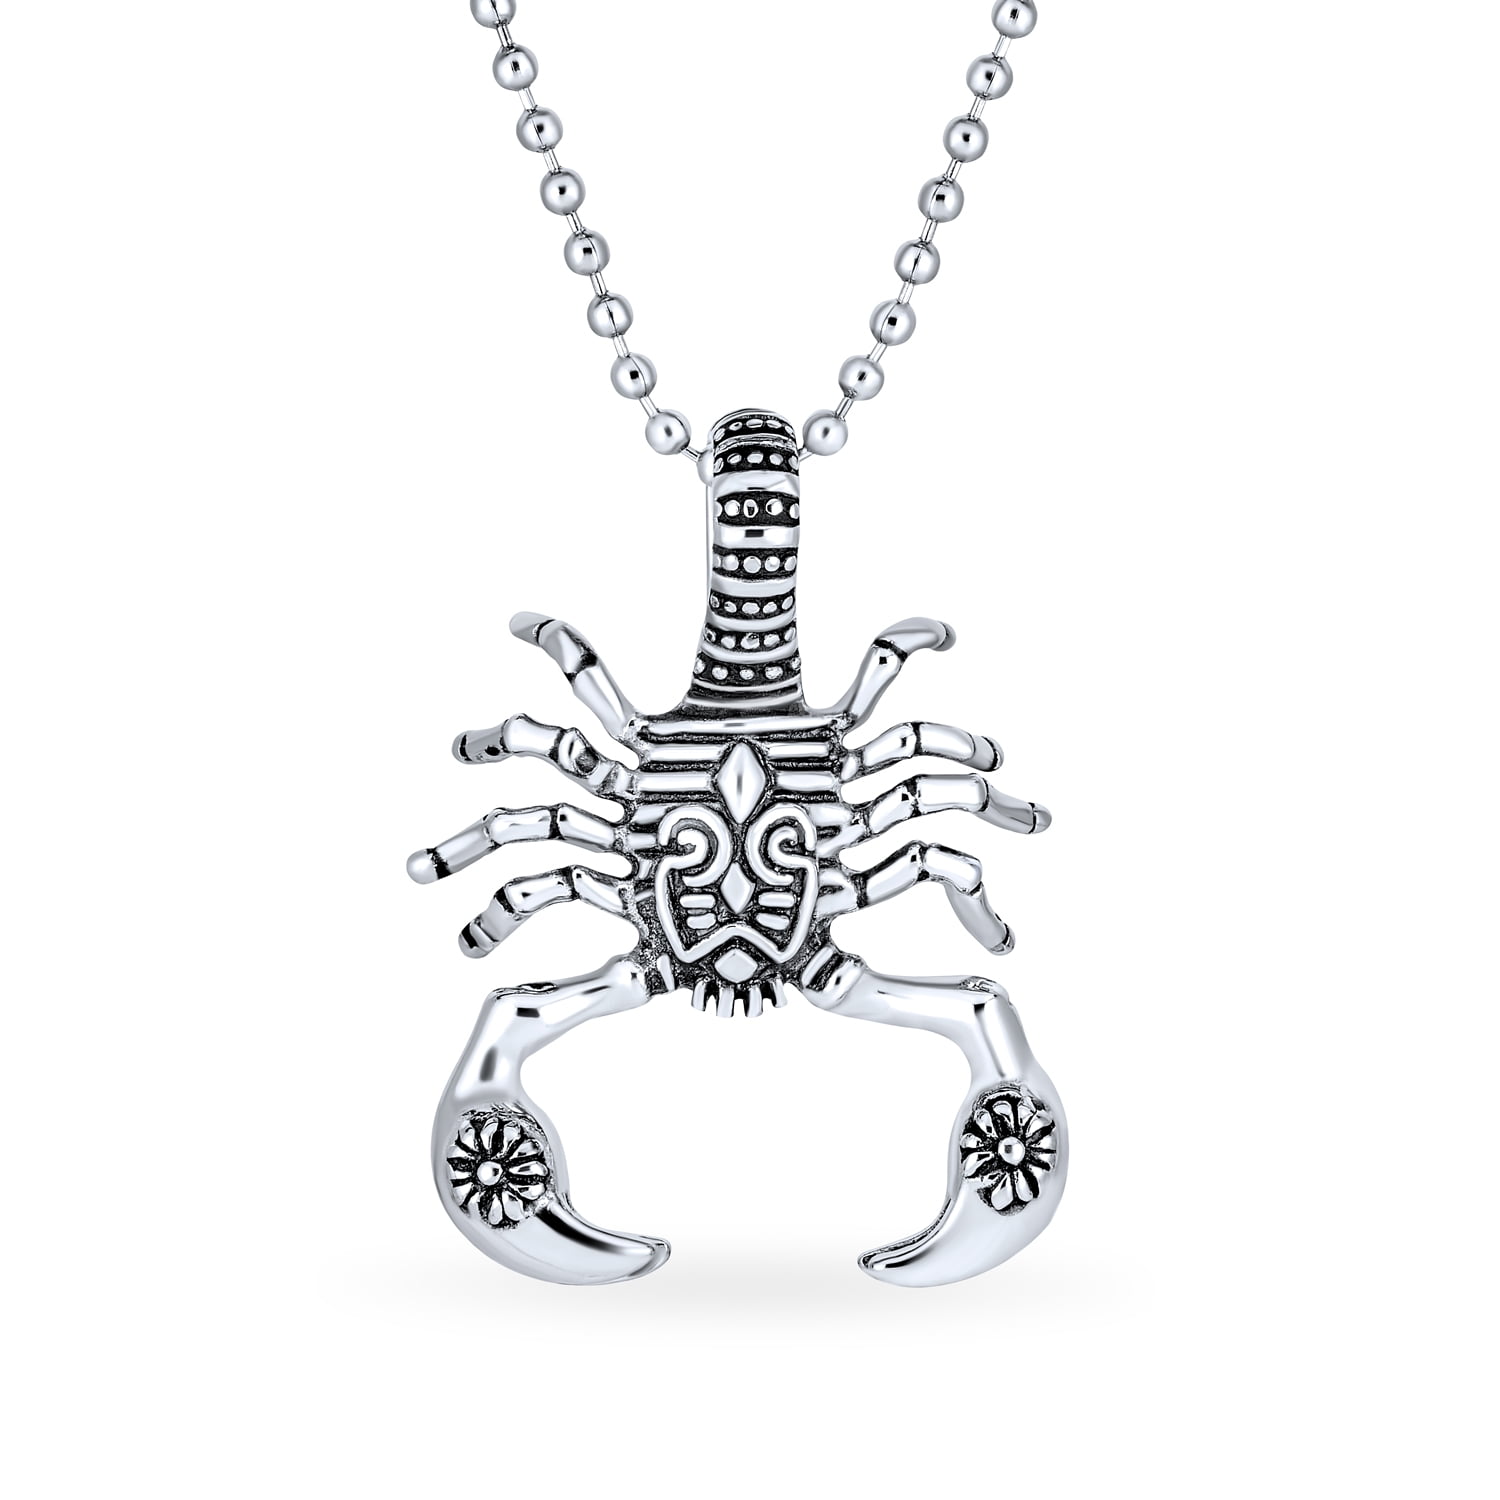 LOPEZ KENT Jewelry Mens Stainless Steel Gothic Silver Super Scorpion Silver Necklace Pendant 